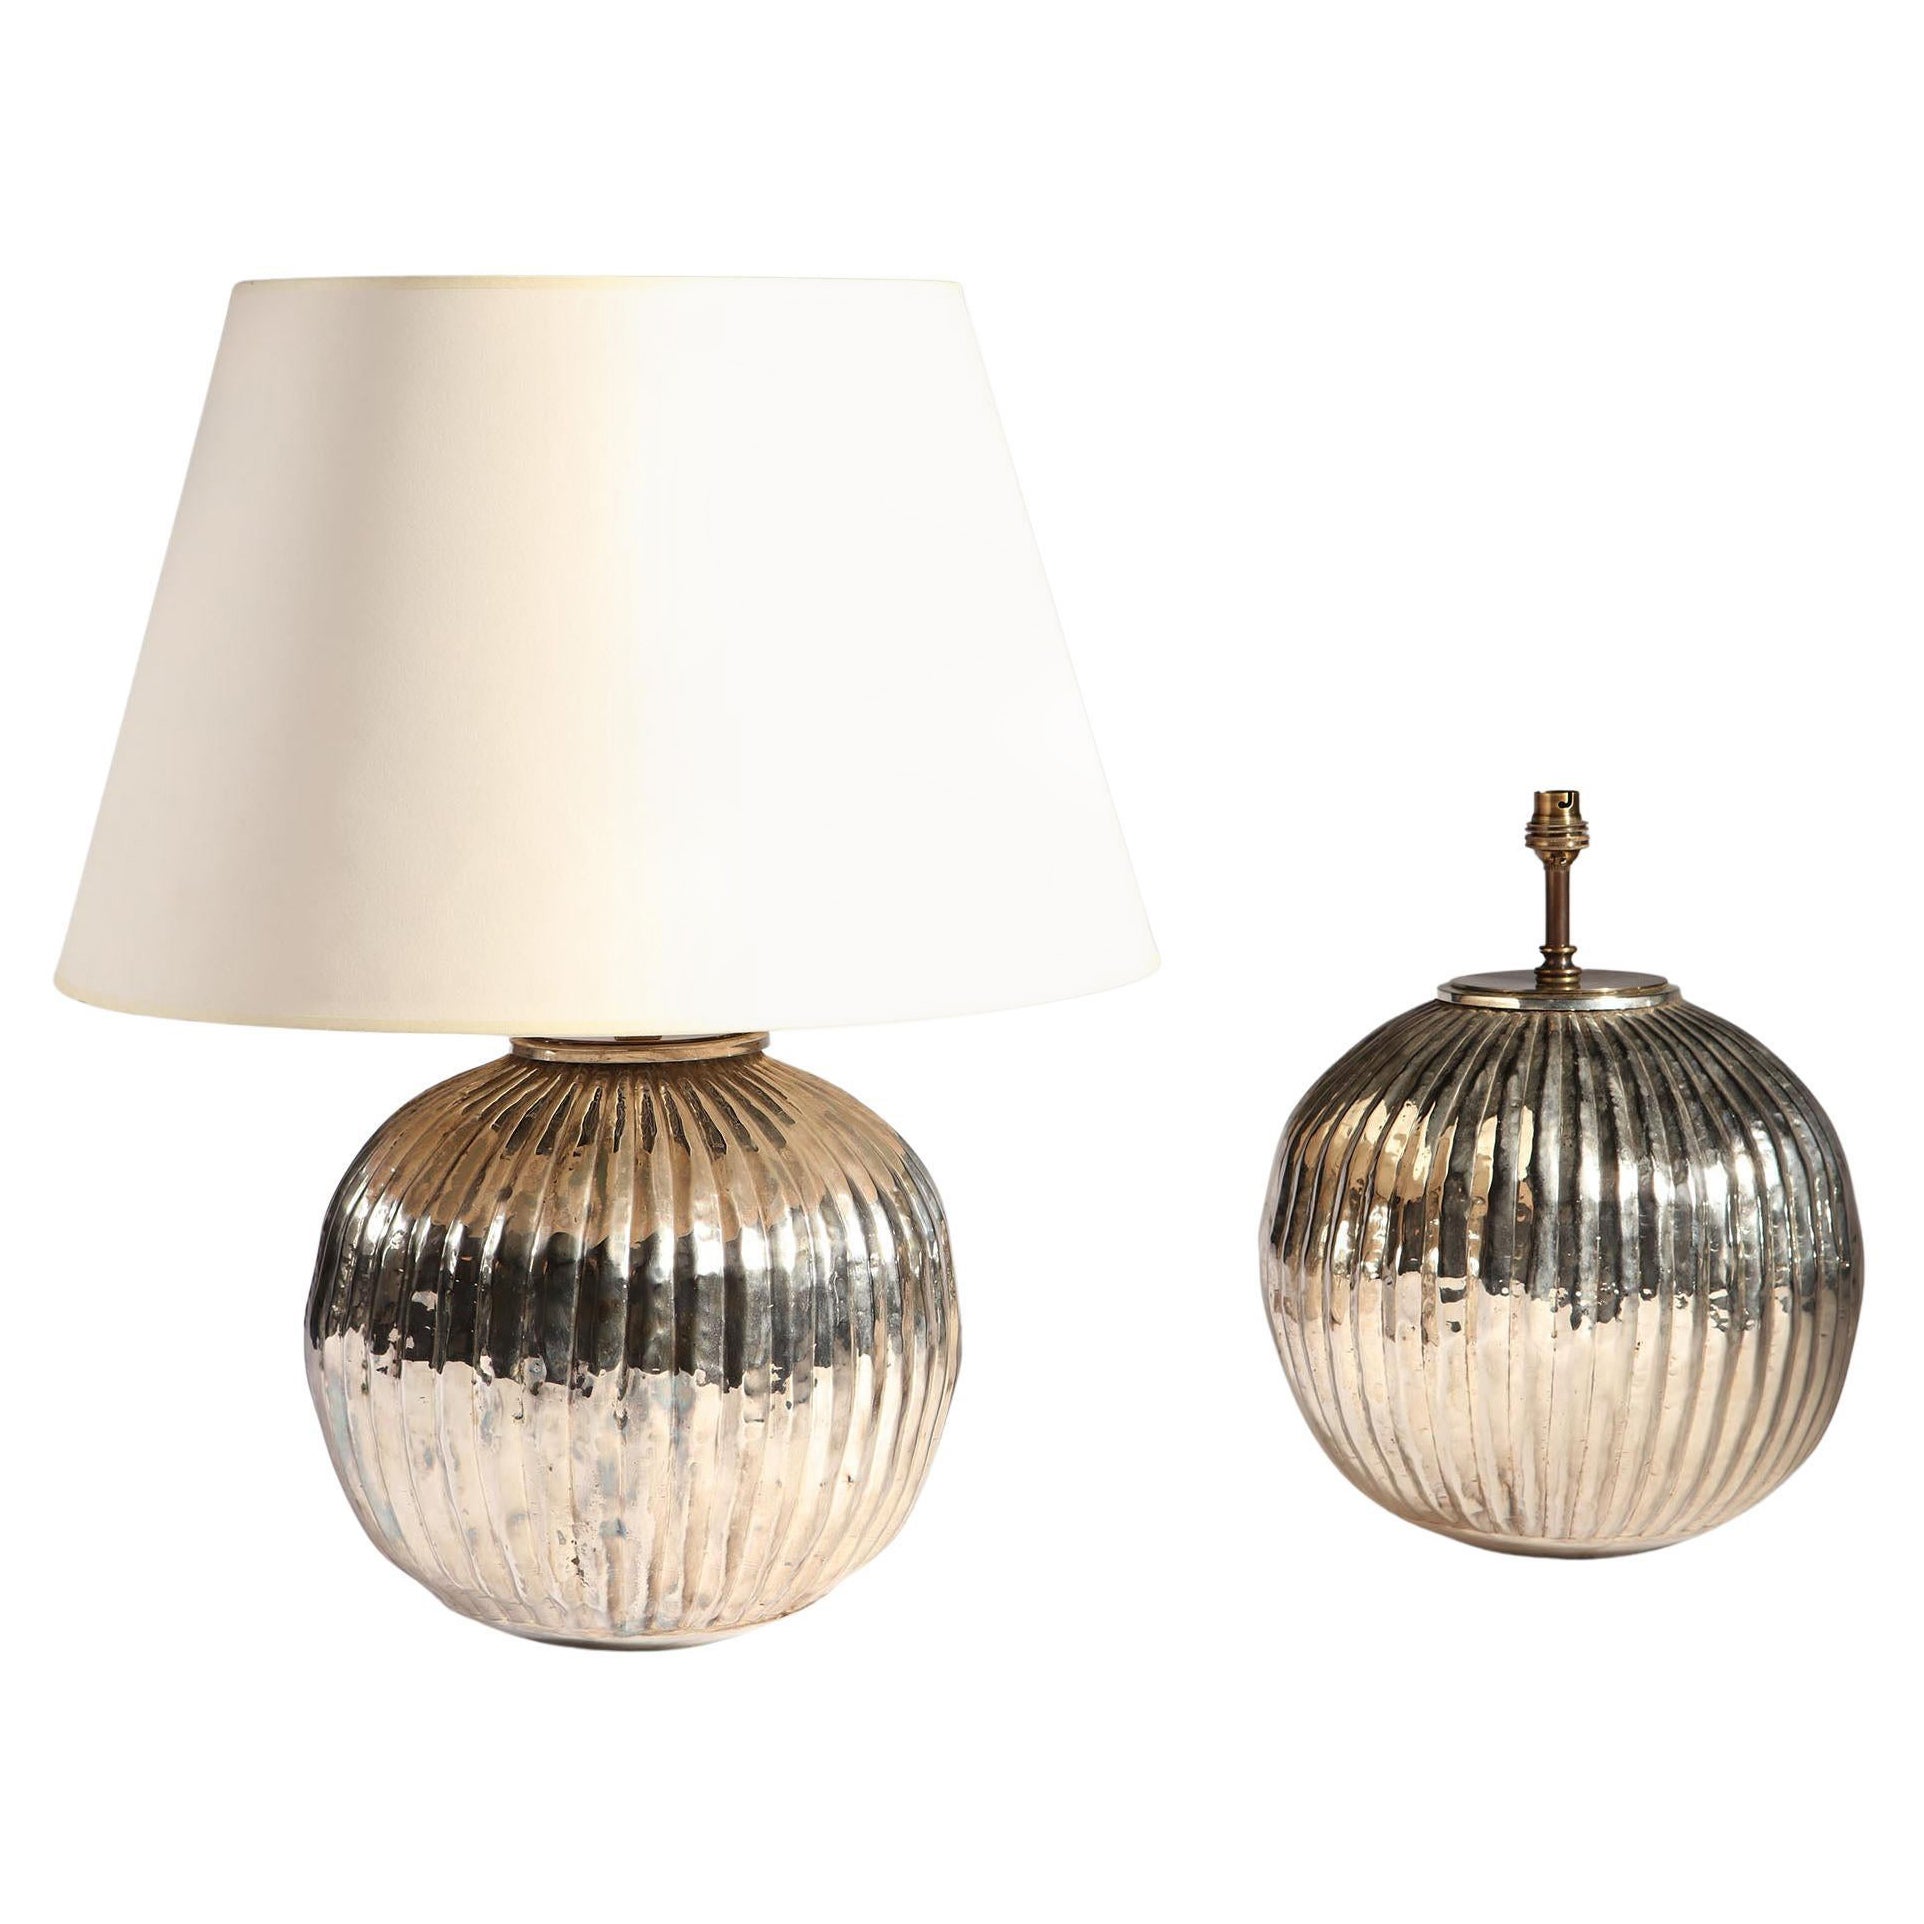 Pair of Mid-Century Silver Gadrooned Table Lamps of Spherical Form